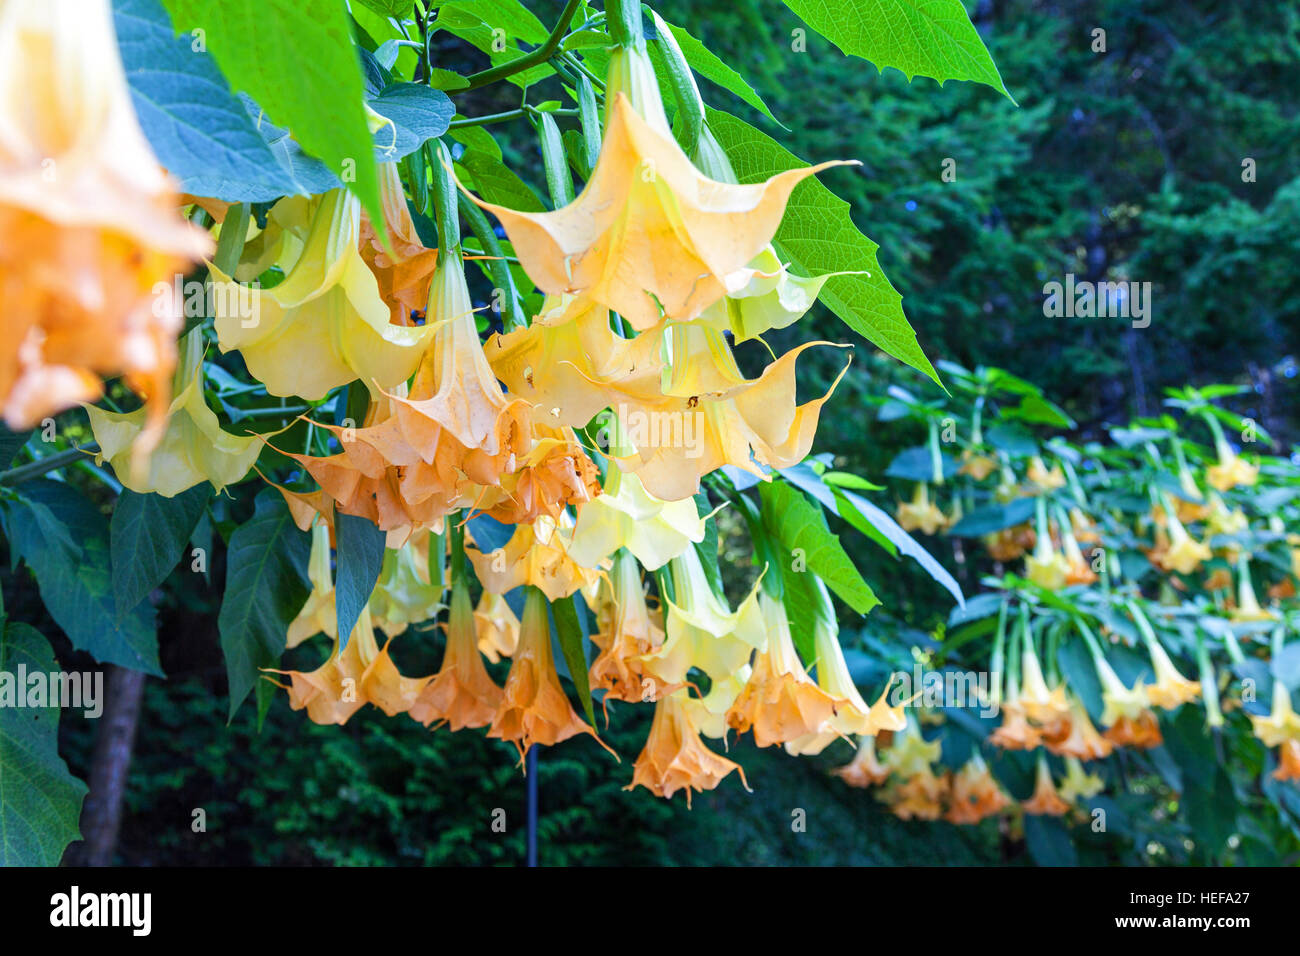 A display of an Angels Trumpet (Brugmansia) shrub at Butchart Gardens near Victoria Vancouver Island British Columbia, Canada Stock Photo